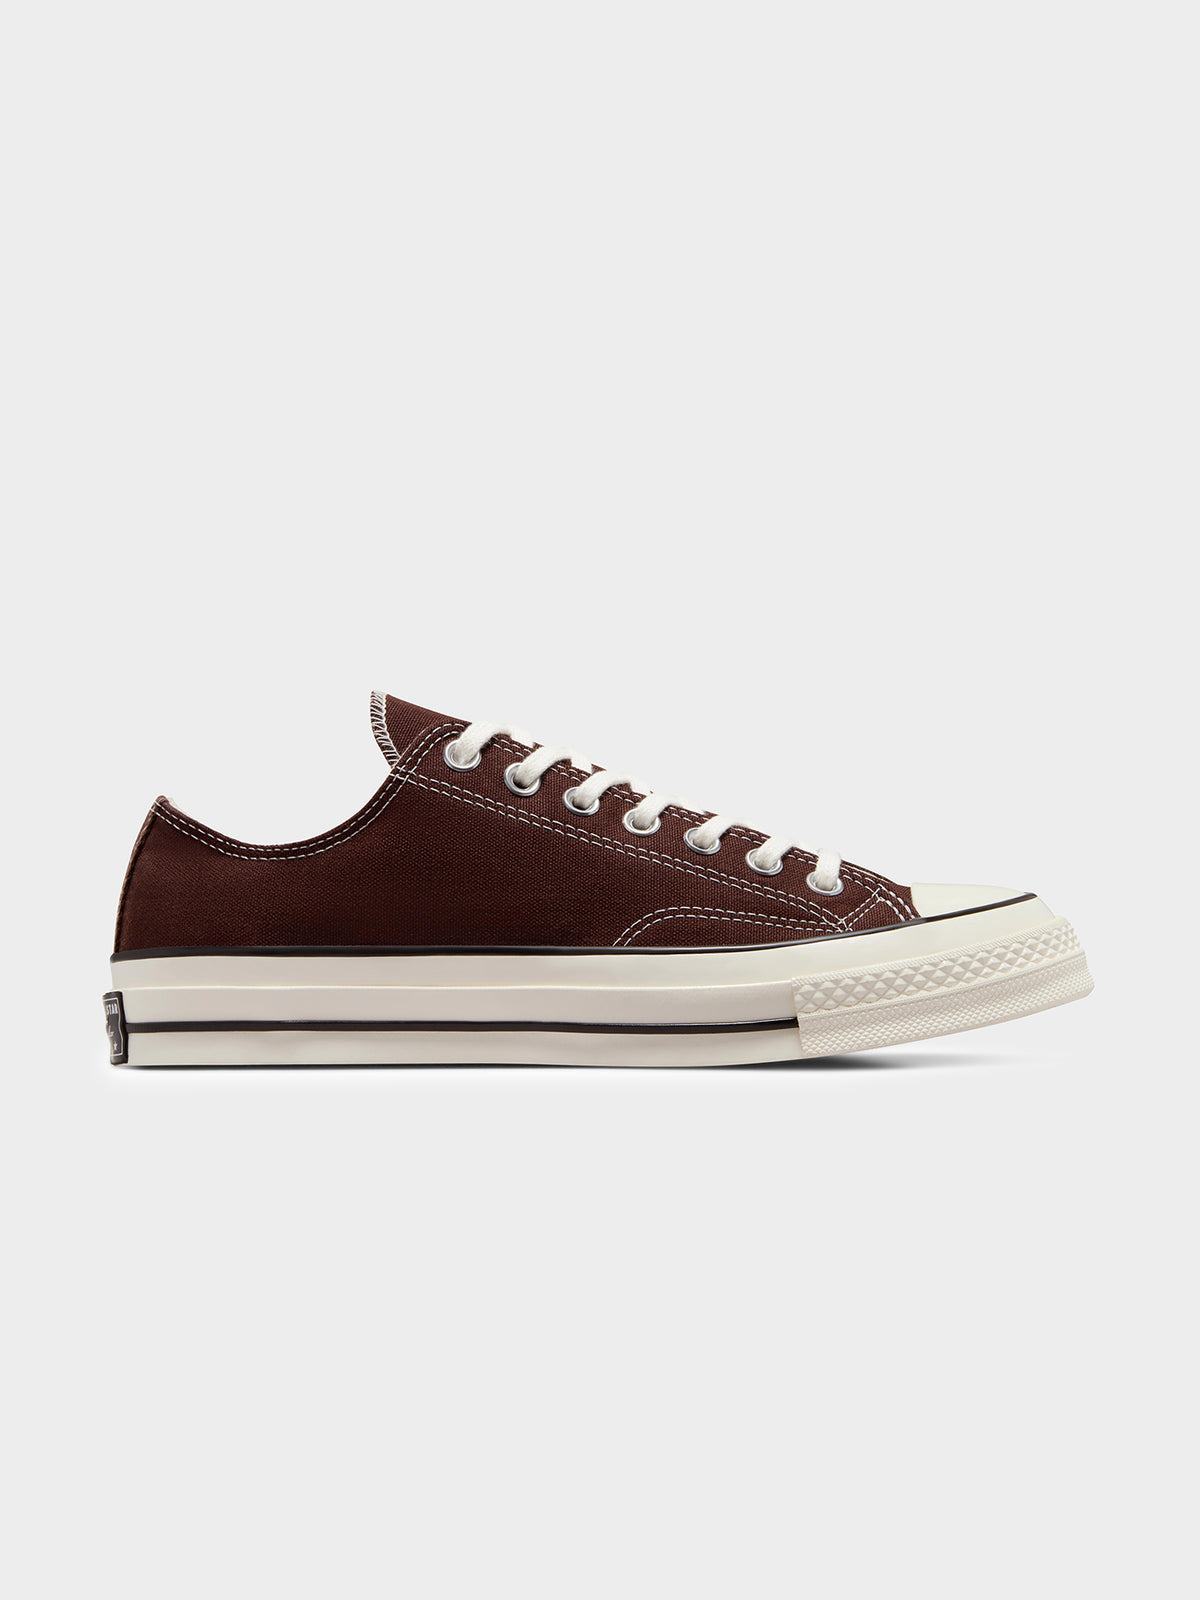 Unisex Chuck Taylor All Star 70 Low Top Sneakers in Dark Root Egret &amp; Black